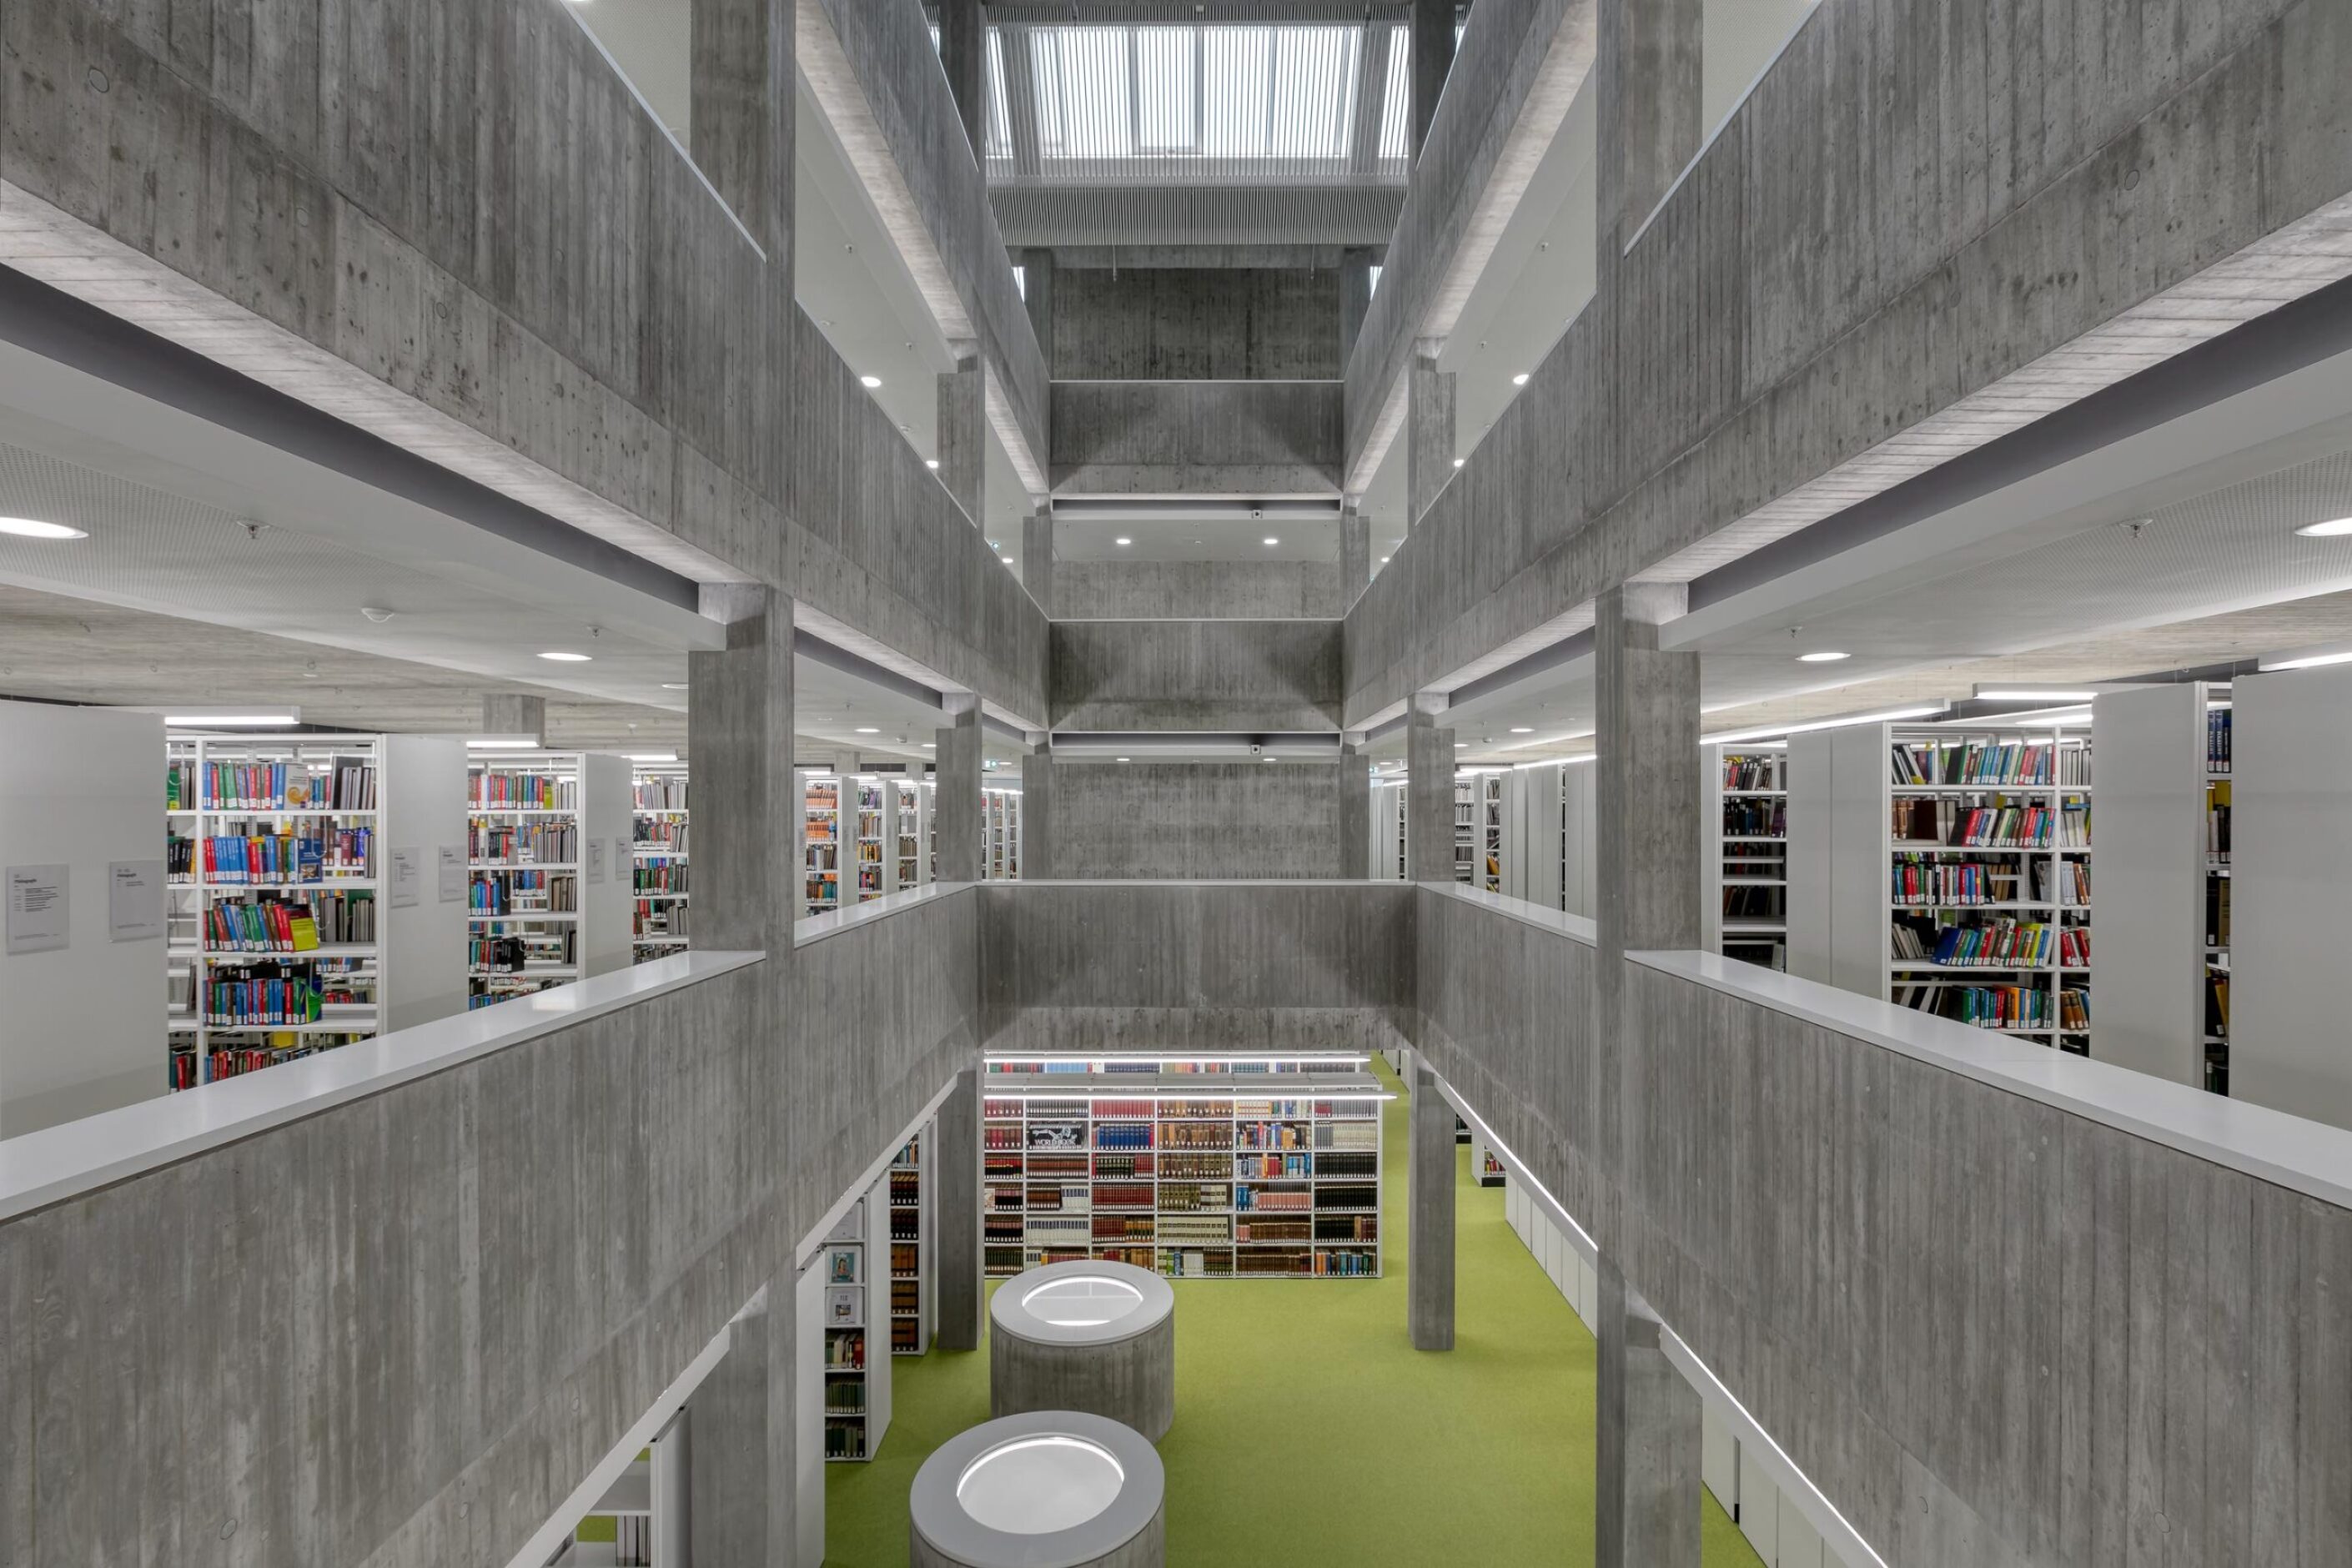 Württemberg State Library │ feco system partition walls │ system walls are acoustically decoupled